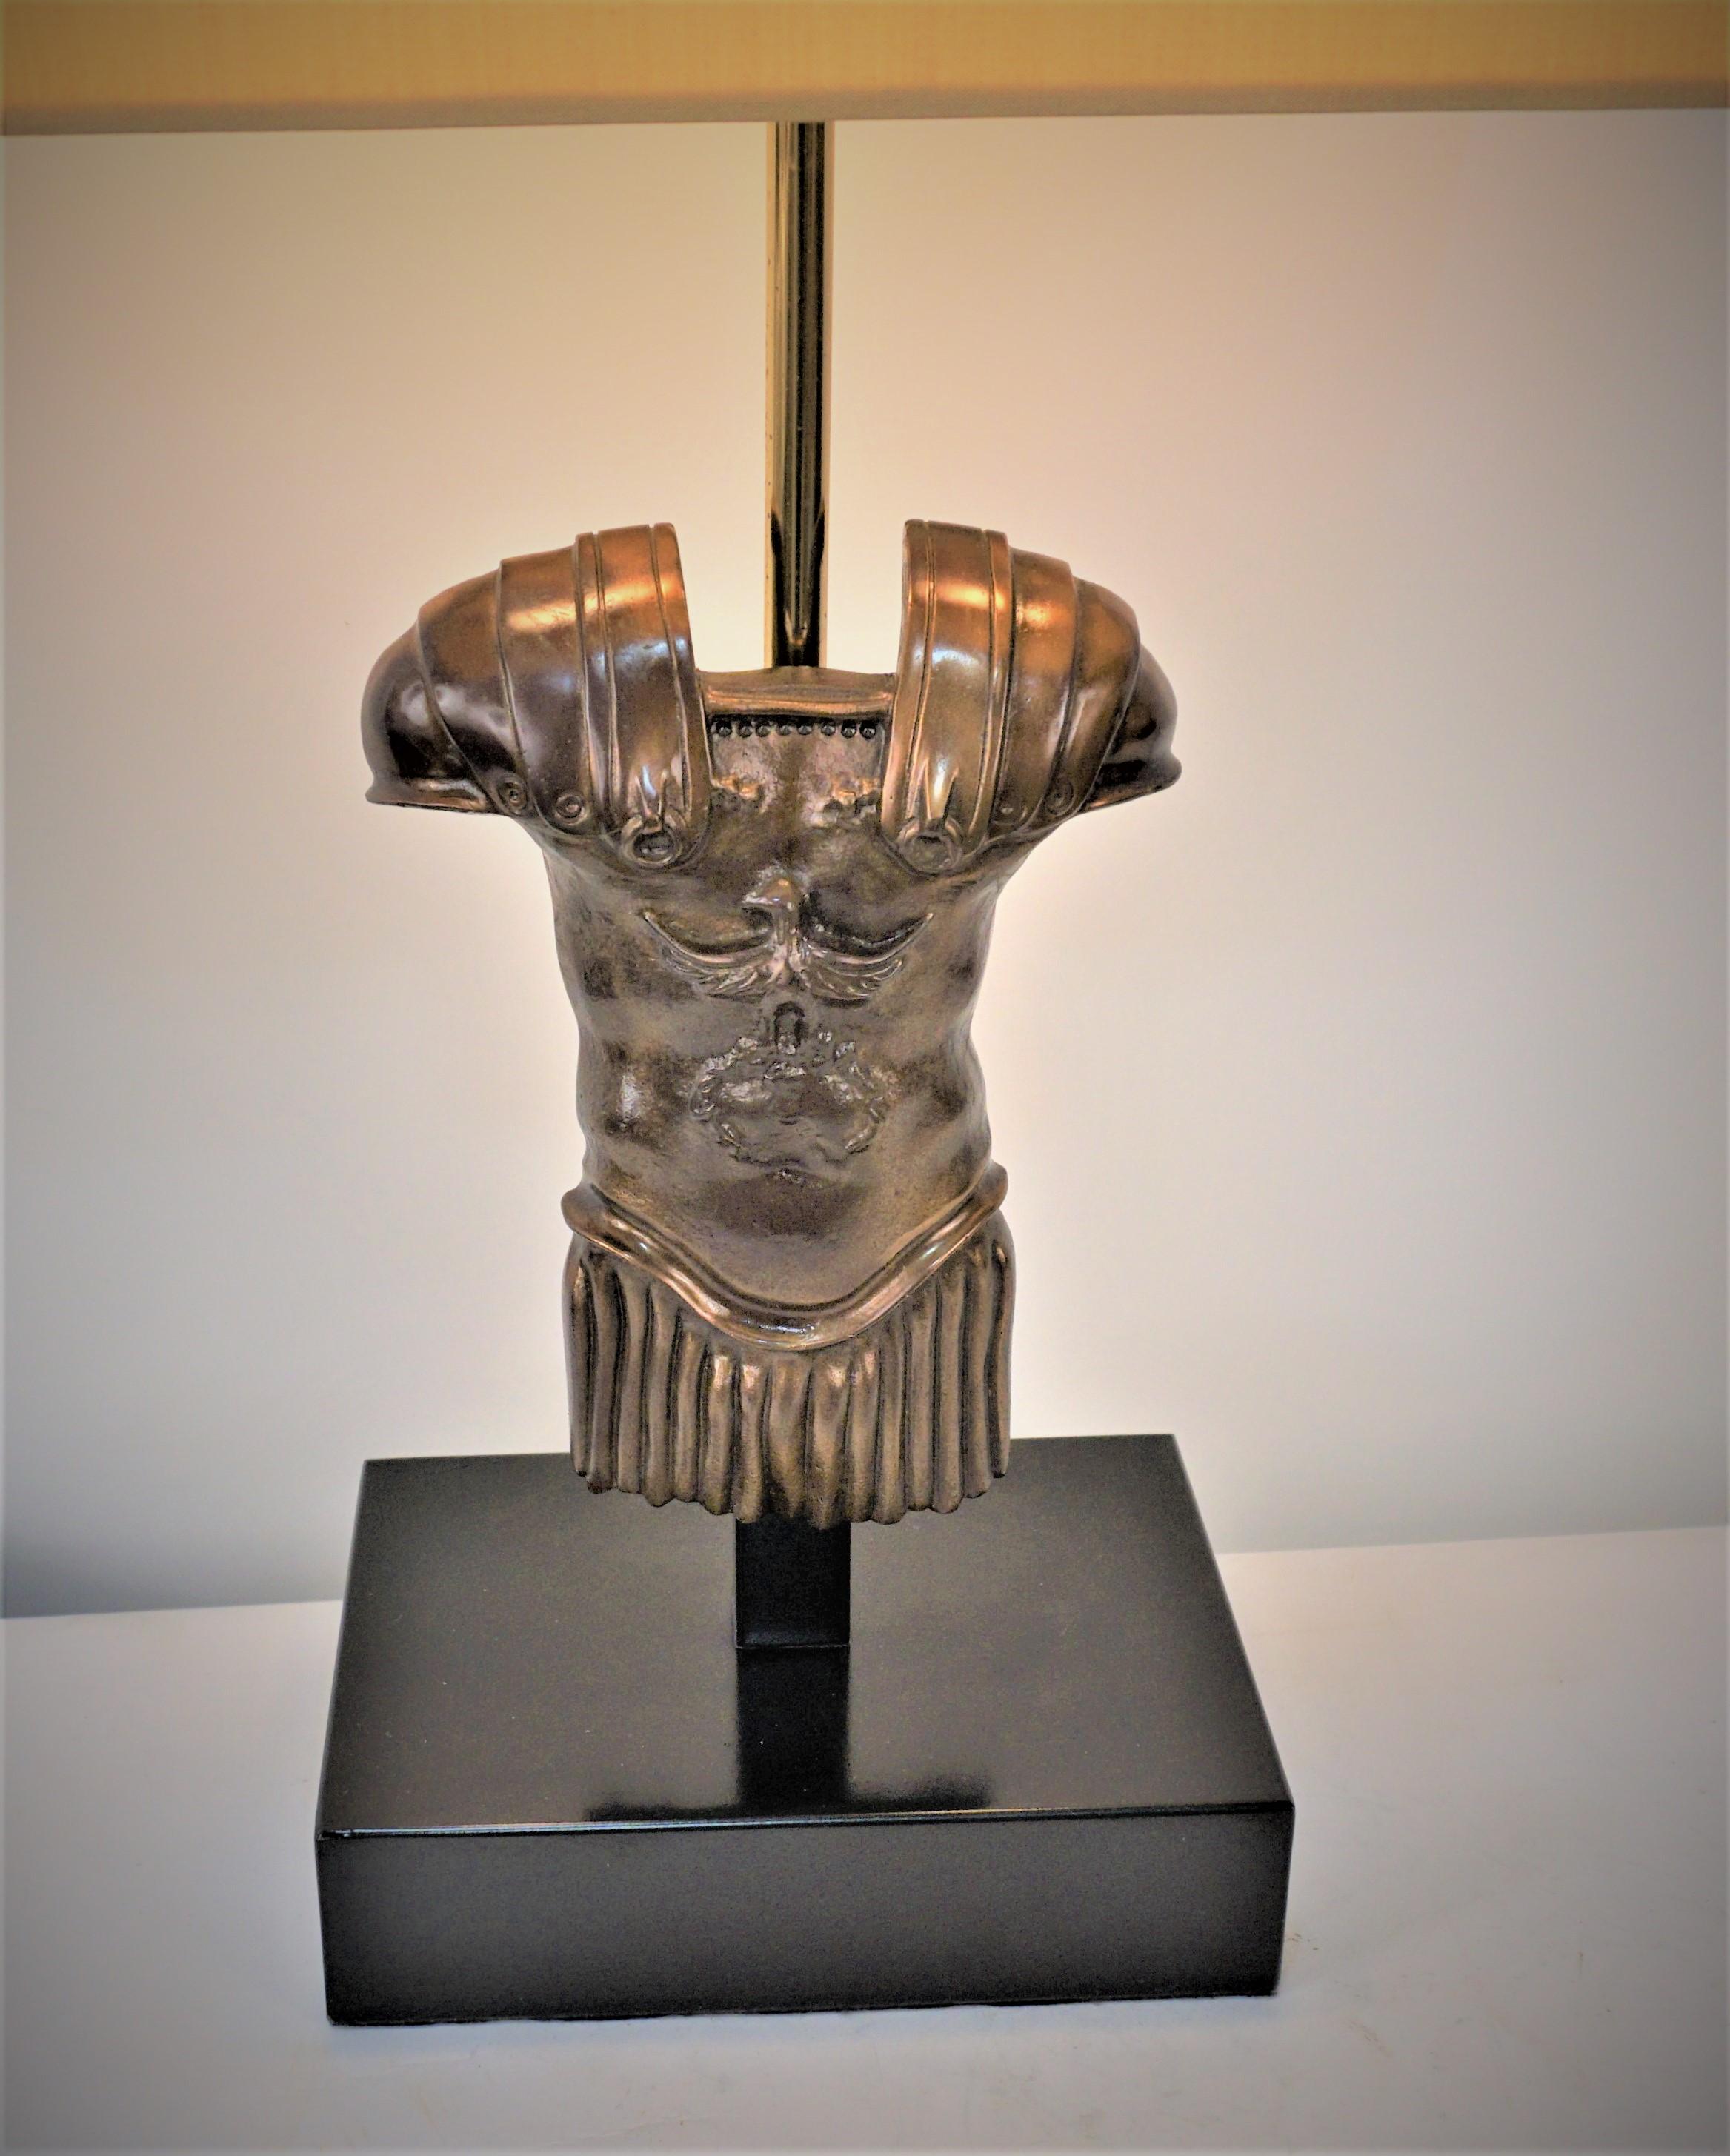 Bronze body armer table lamp with black base and silk lampshade.
Measurement includes the lampshade.